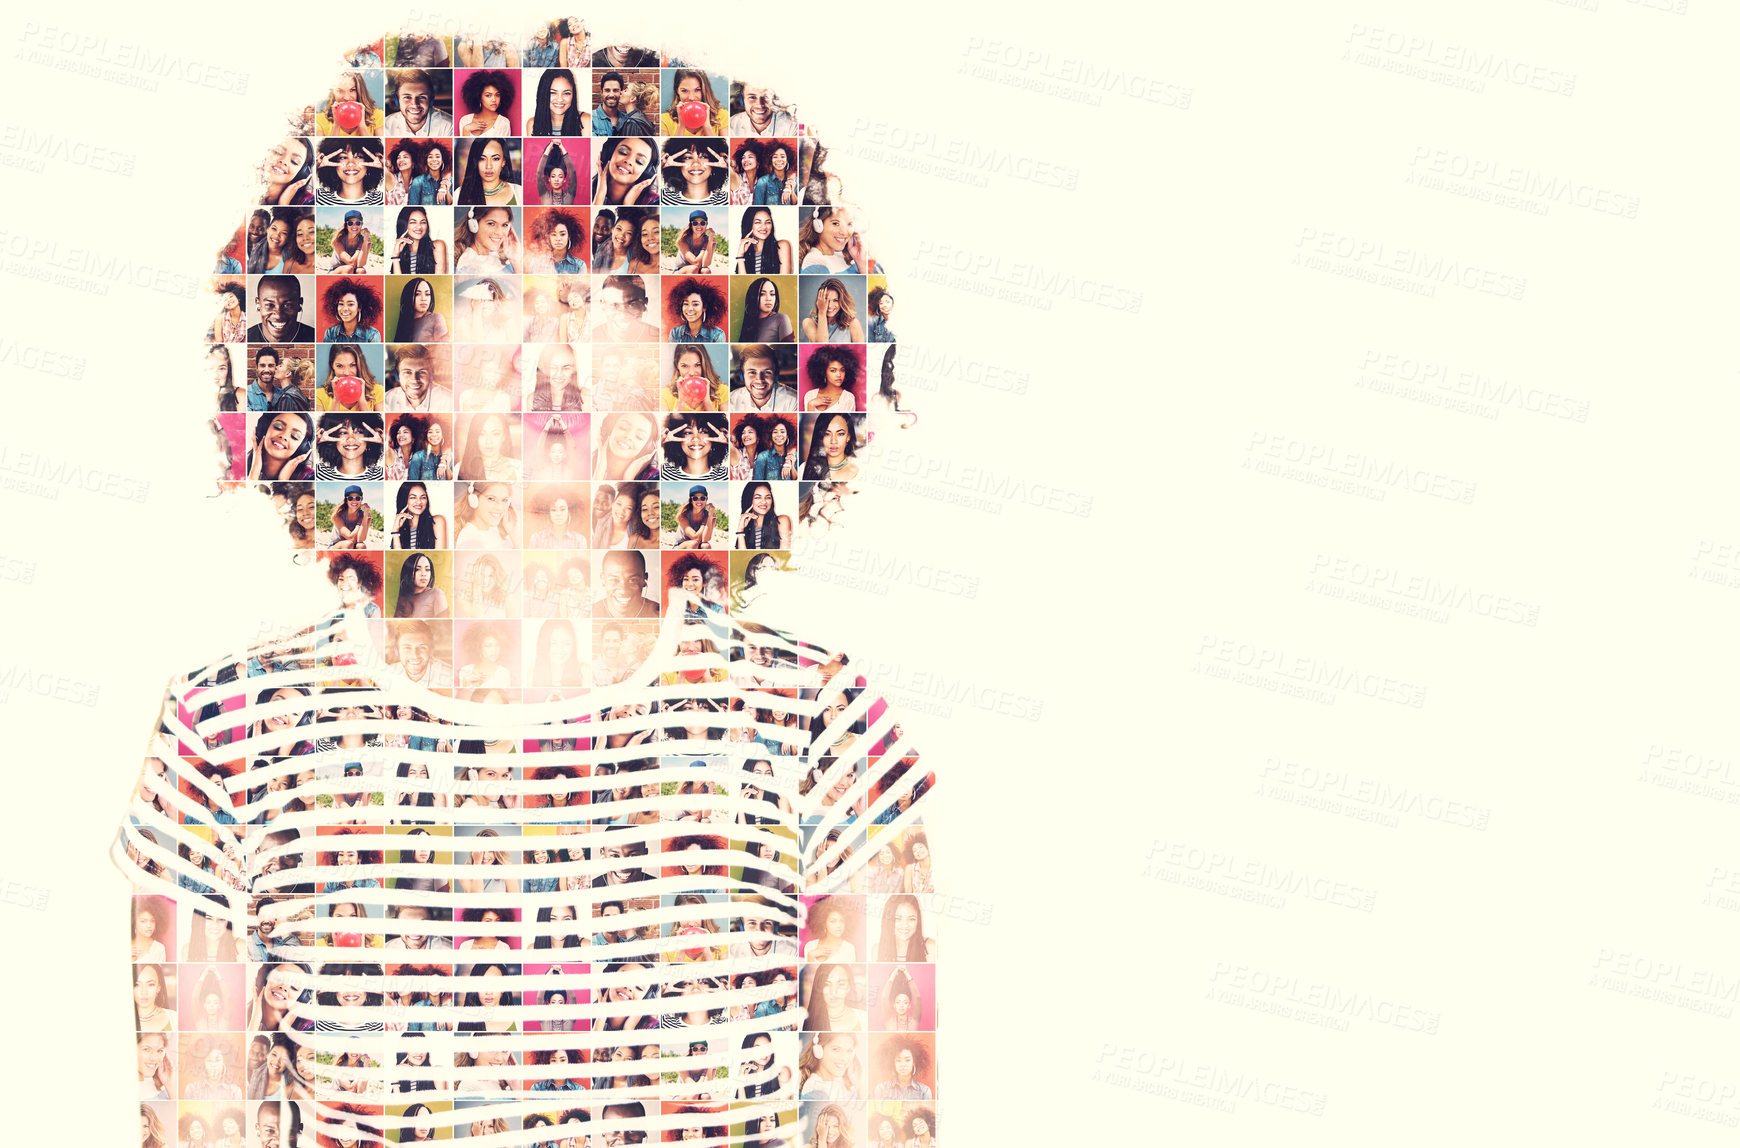 Buy stock photo Composite image of a diverse group of people superimposed on a woman's face